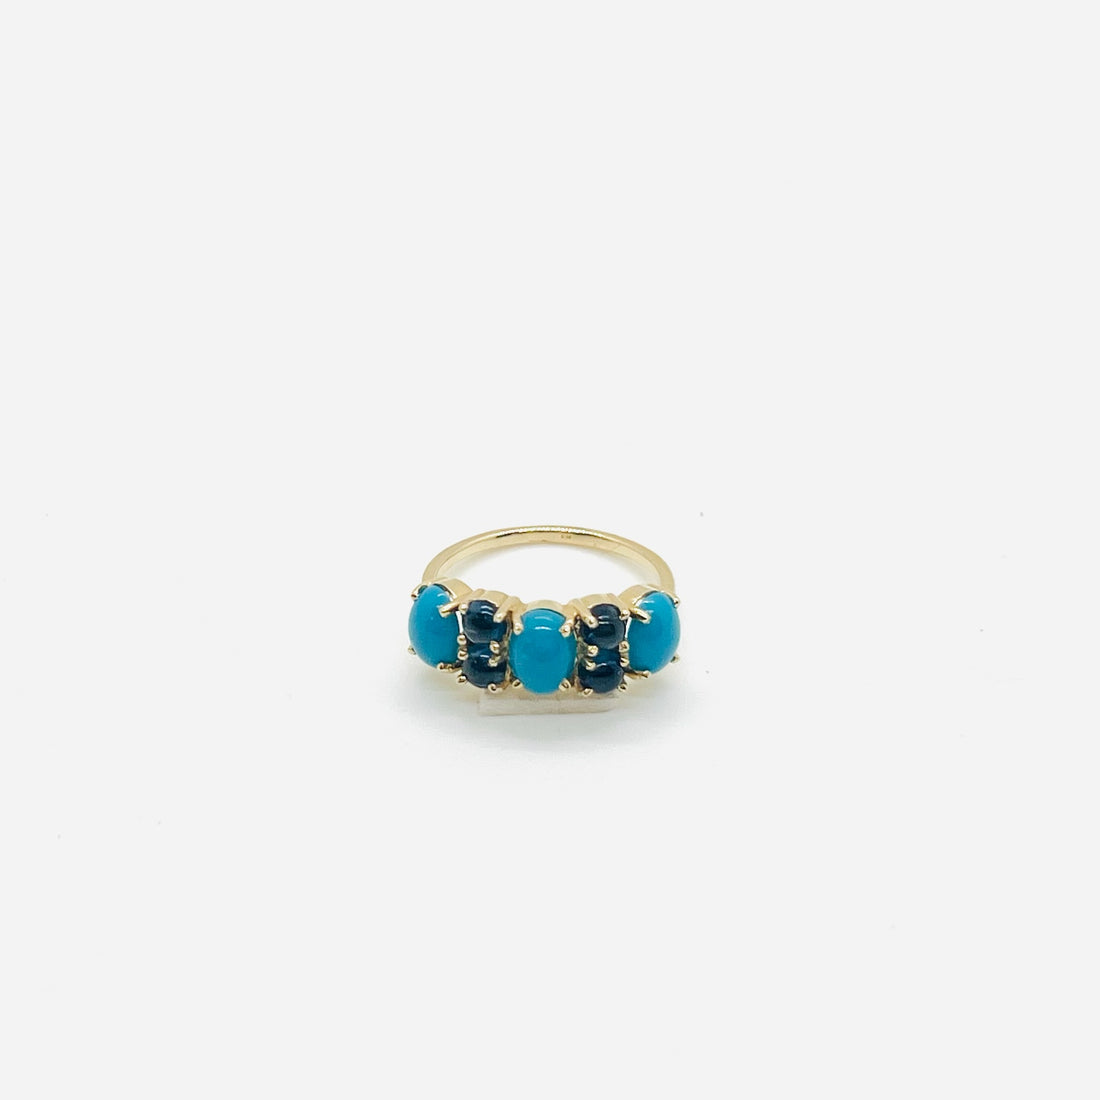 14k gold, turquoise and blue sapphire ring